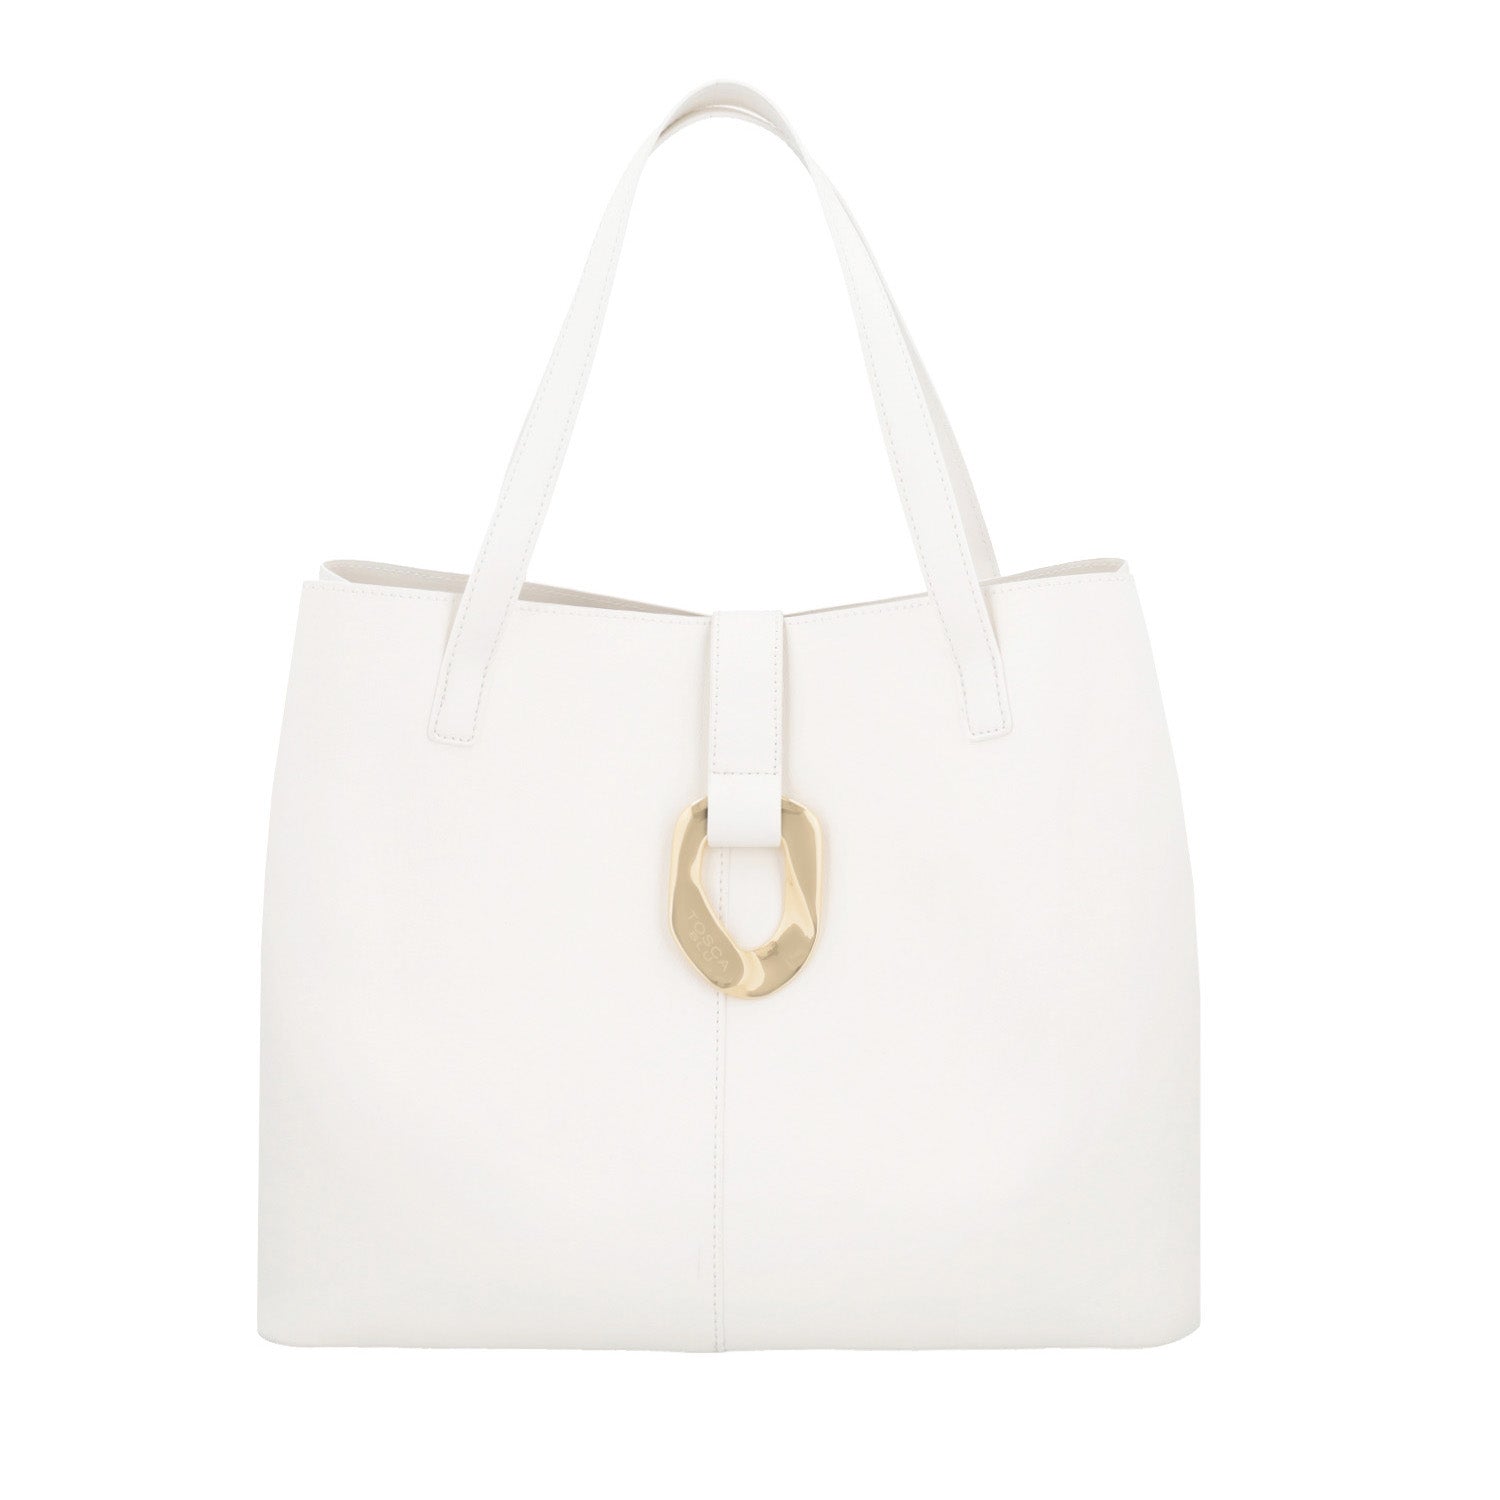 WHITE PRIMULA SHOPPING BAG WITH GOLDEN ACCESSORY